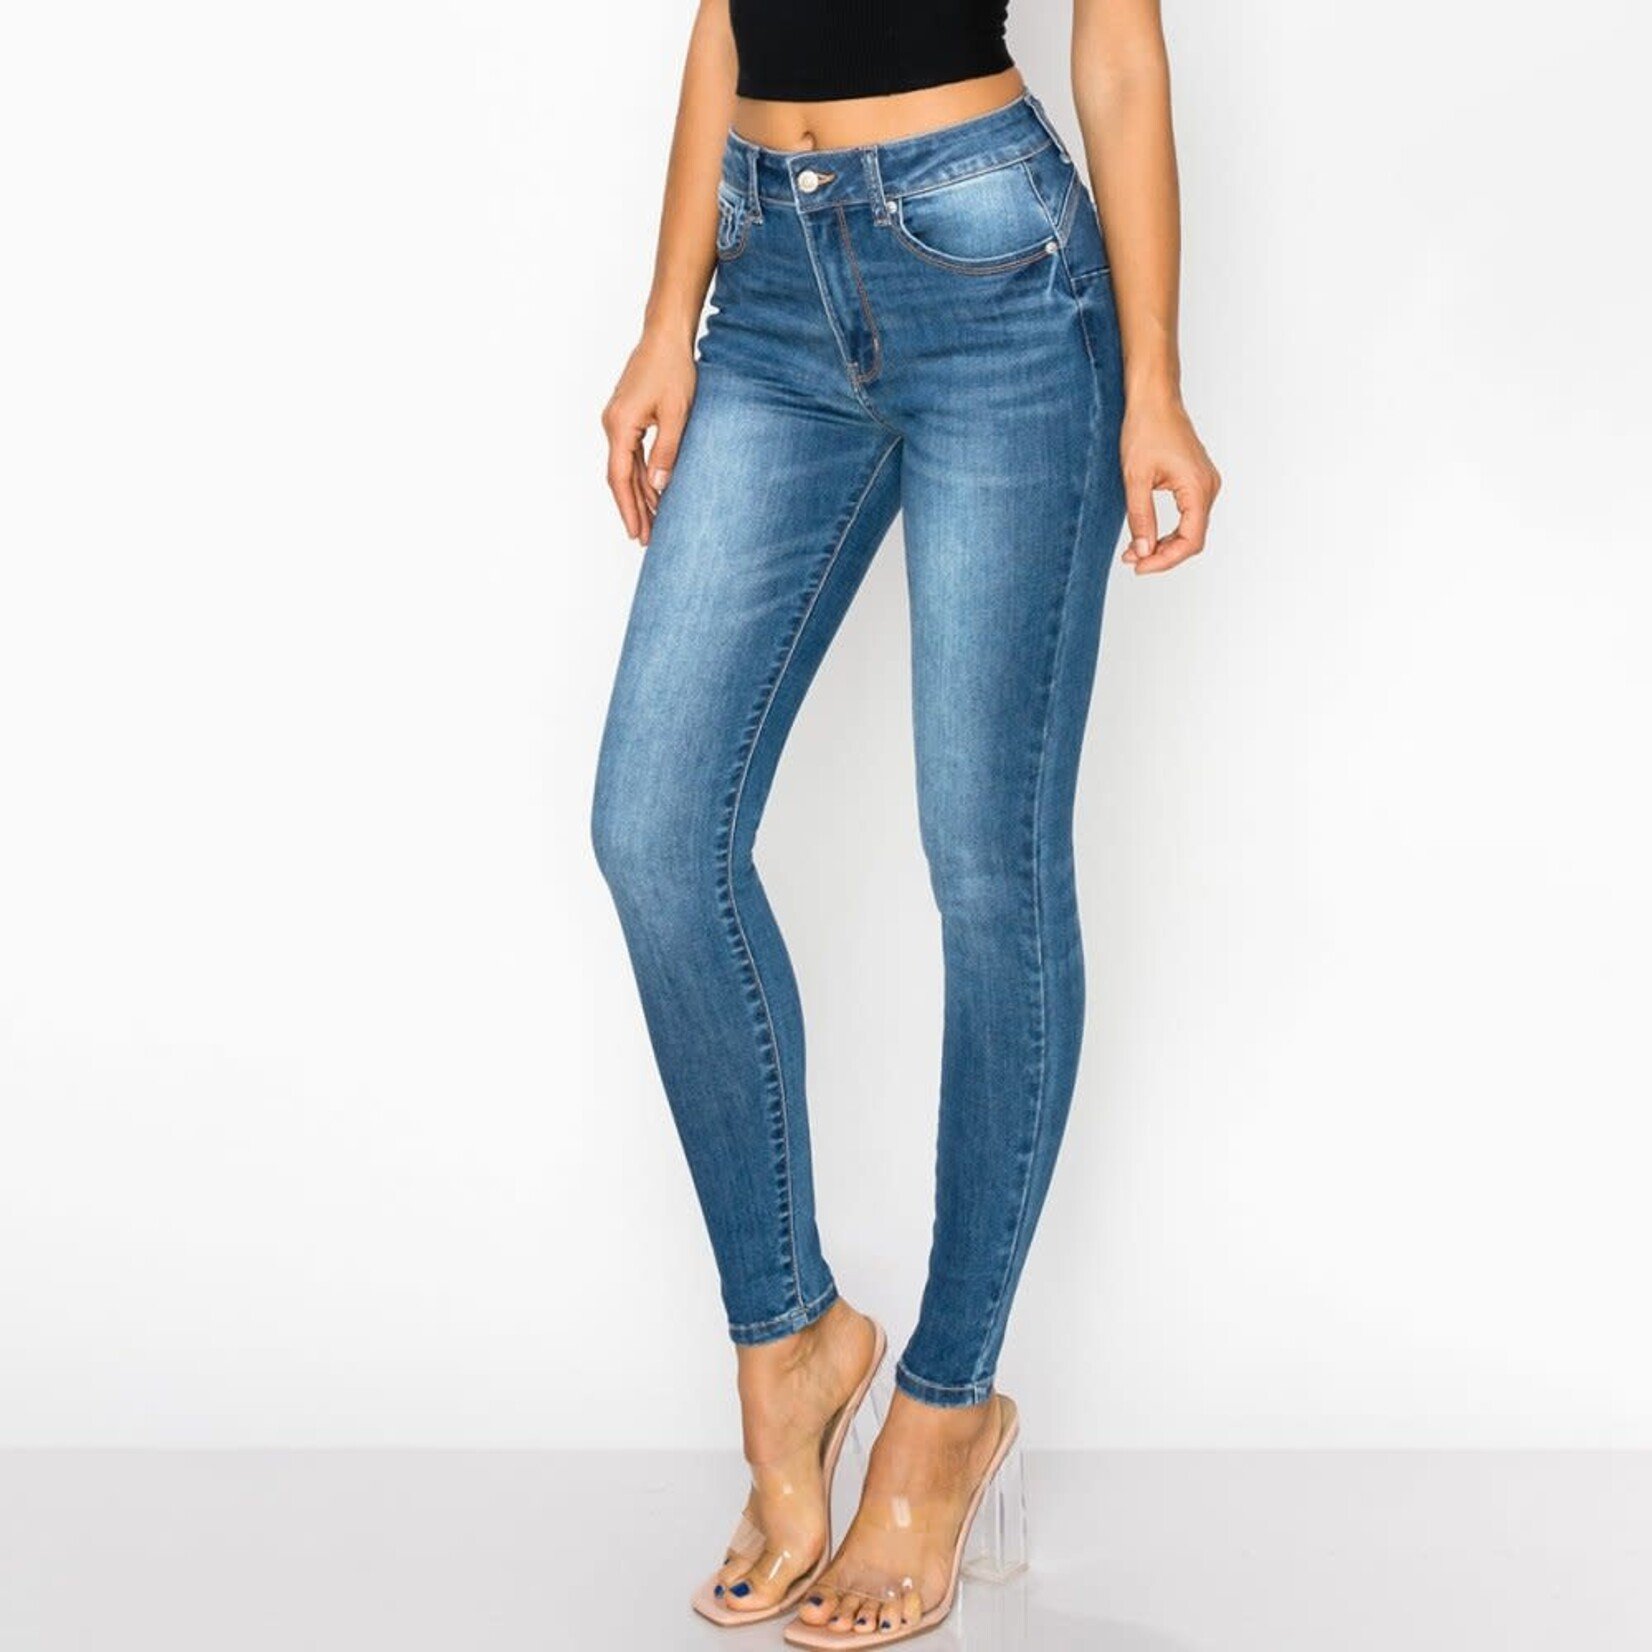 Wax Jeans Wax Jean - Repreve High-Rise Push-Up Skinny Jean - 90501